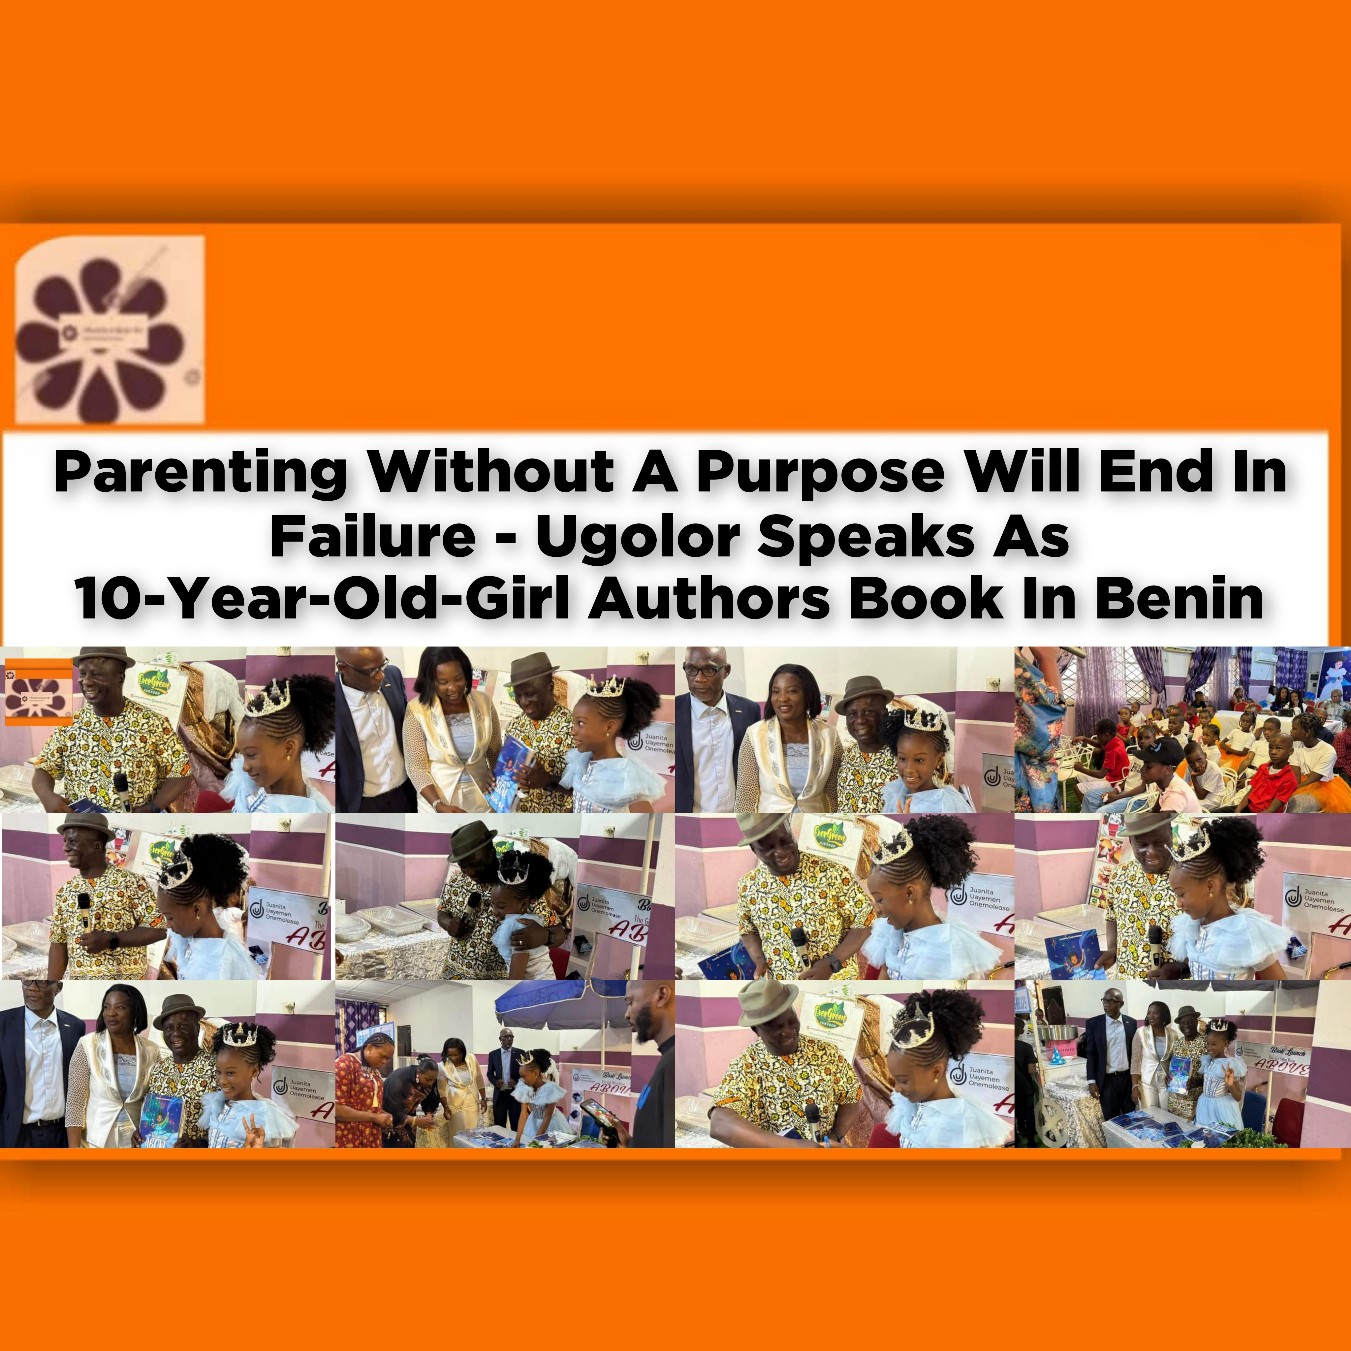 Parenting Without A Purpose Will End In Failure - Ugolor Speaks As 10-Year-Old-Girl Authors Book In Benin ~ OsazuwaAkonedo #army